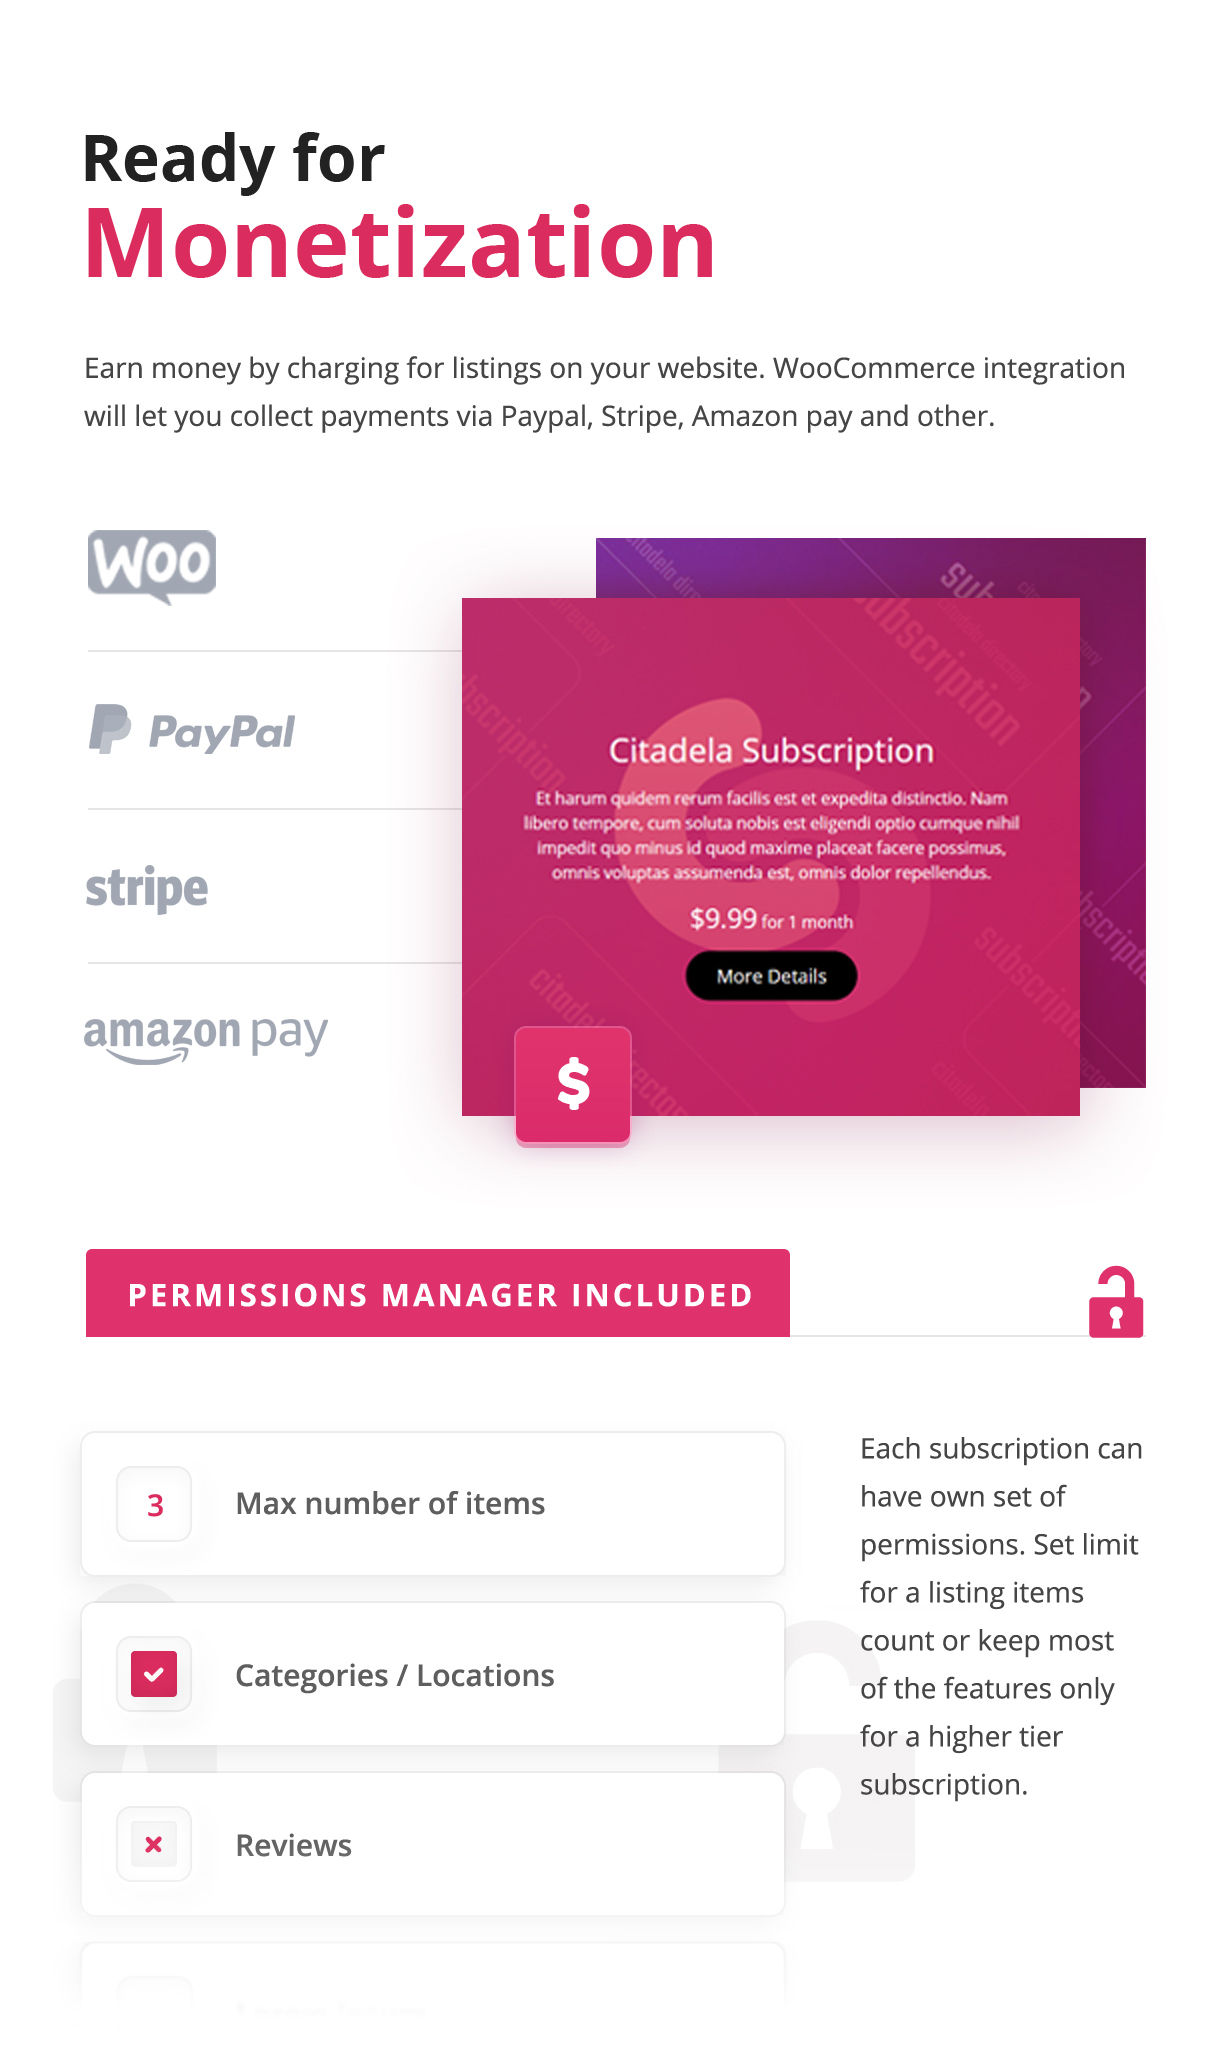 Monetization via WooCommerce with support for PayPal, Stripe, Amazon pay and more